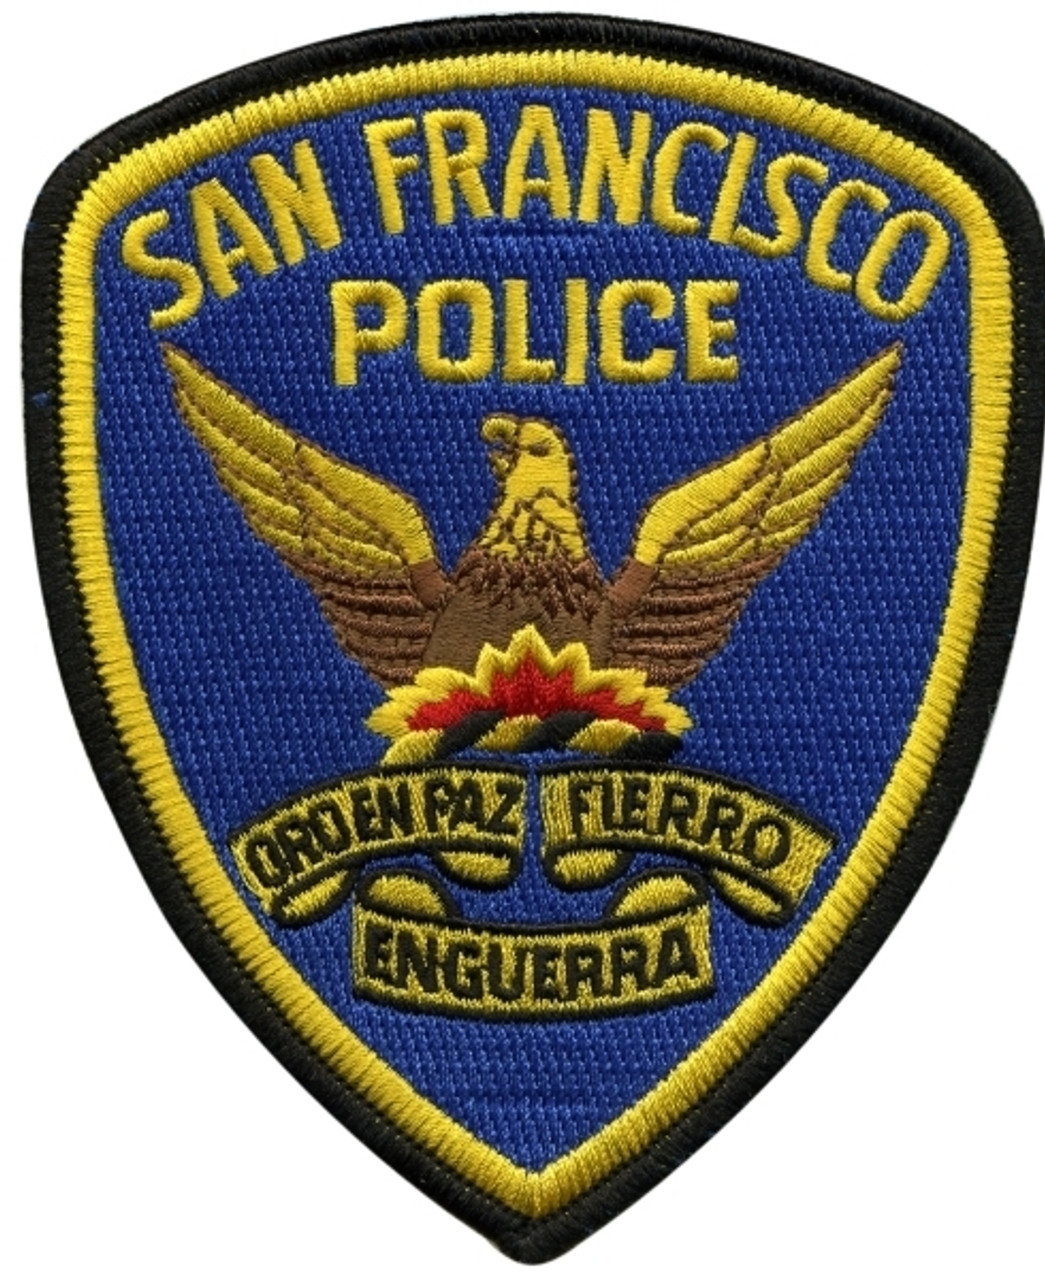 SAN FRANCISCO POLICE SECURITY PATCH